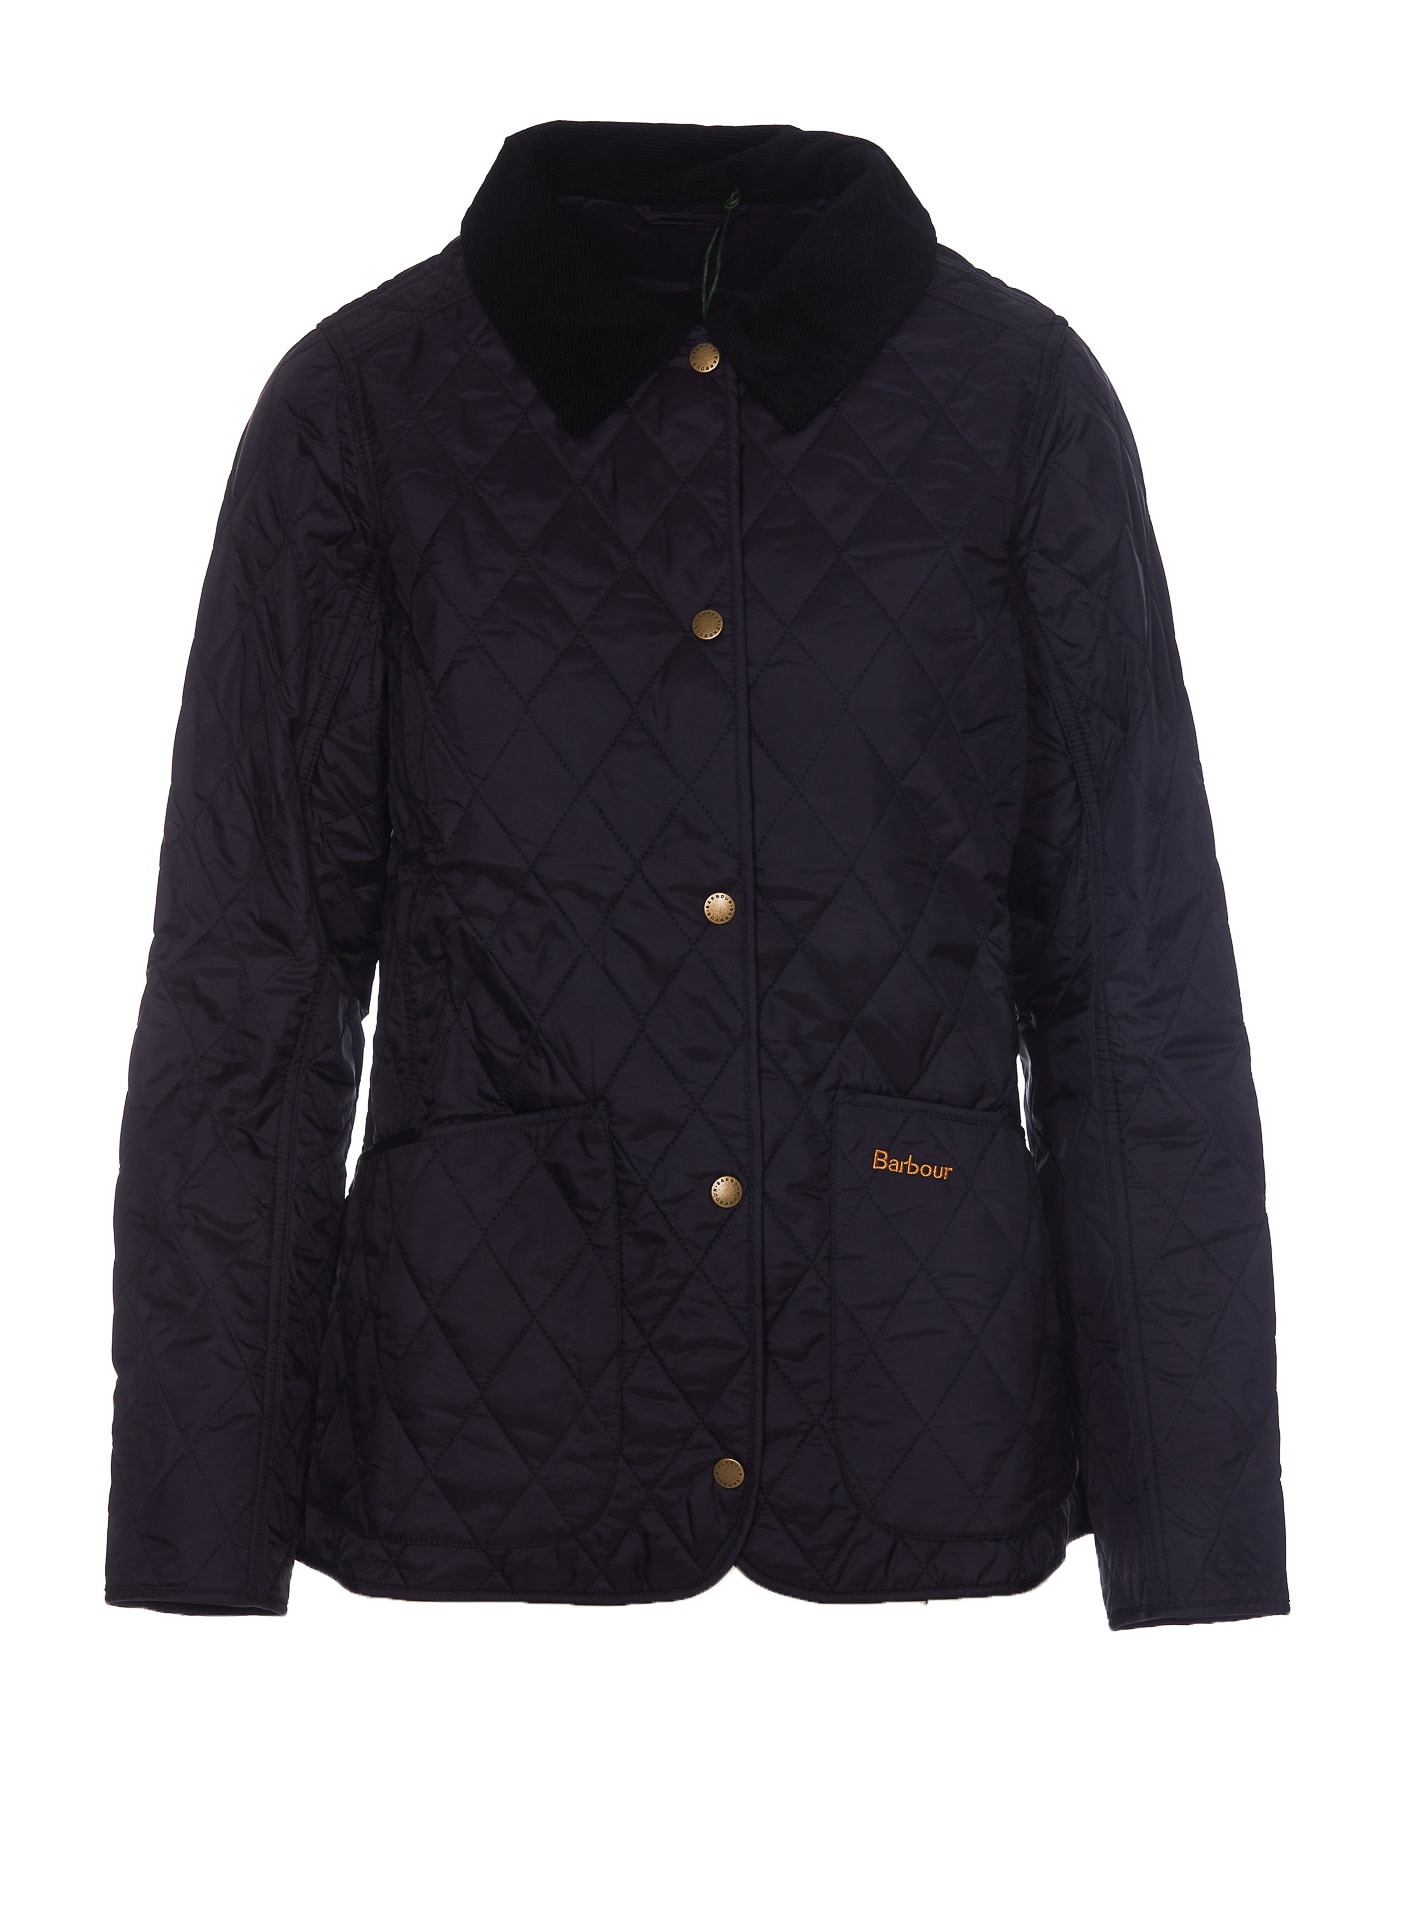 BARBOUR ANNANDALE JACKET